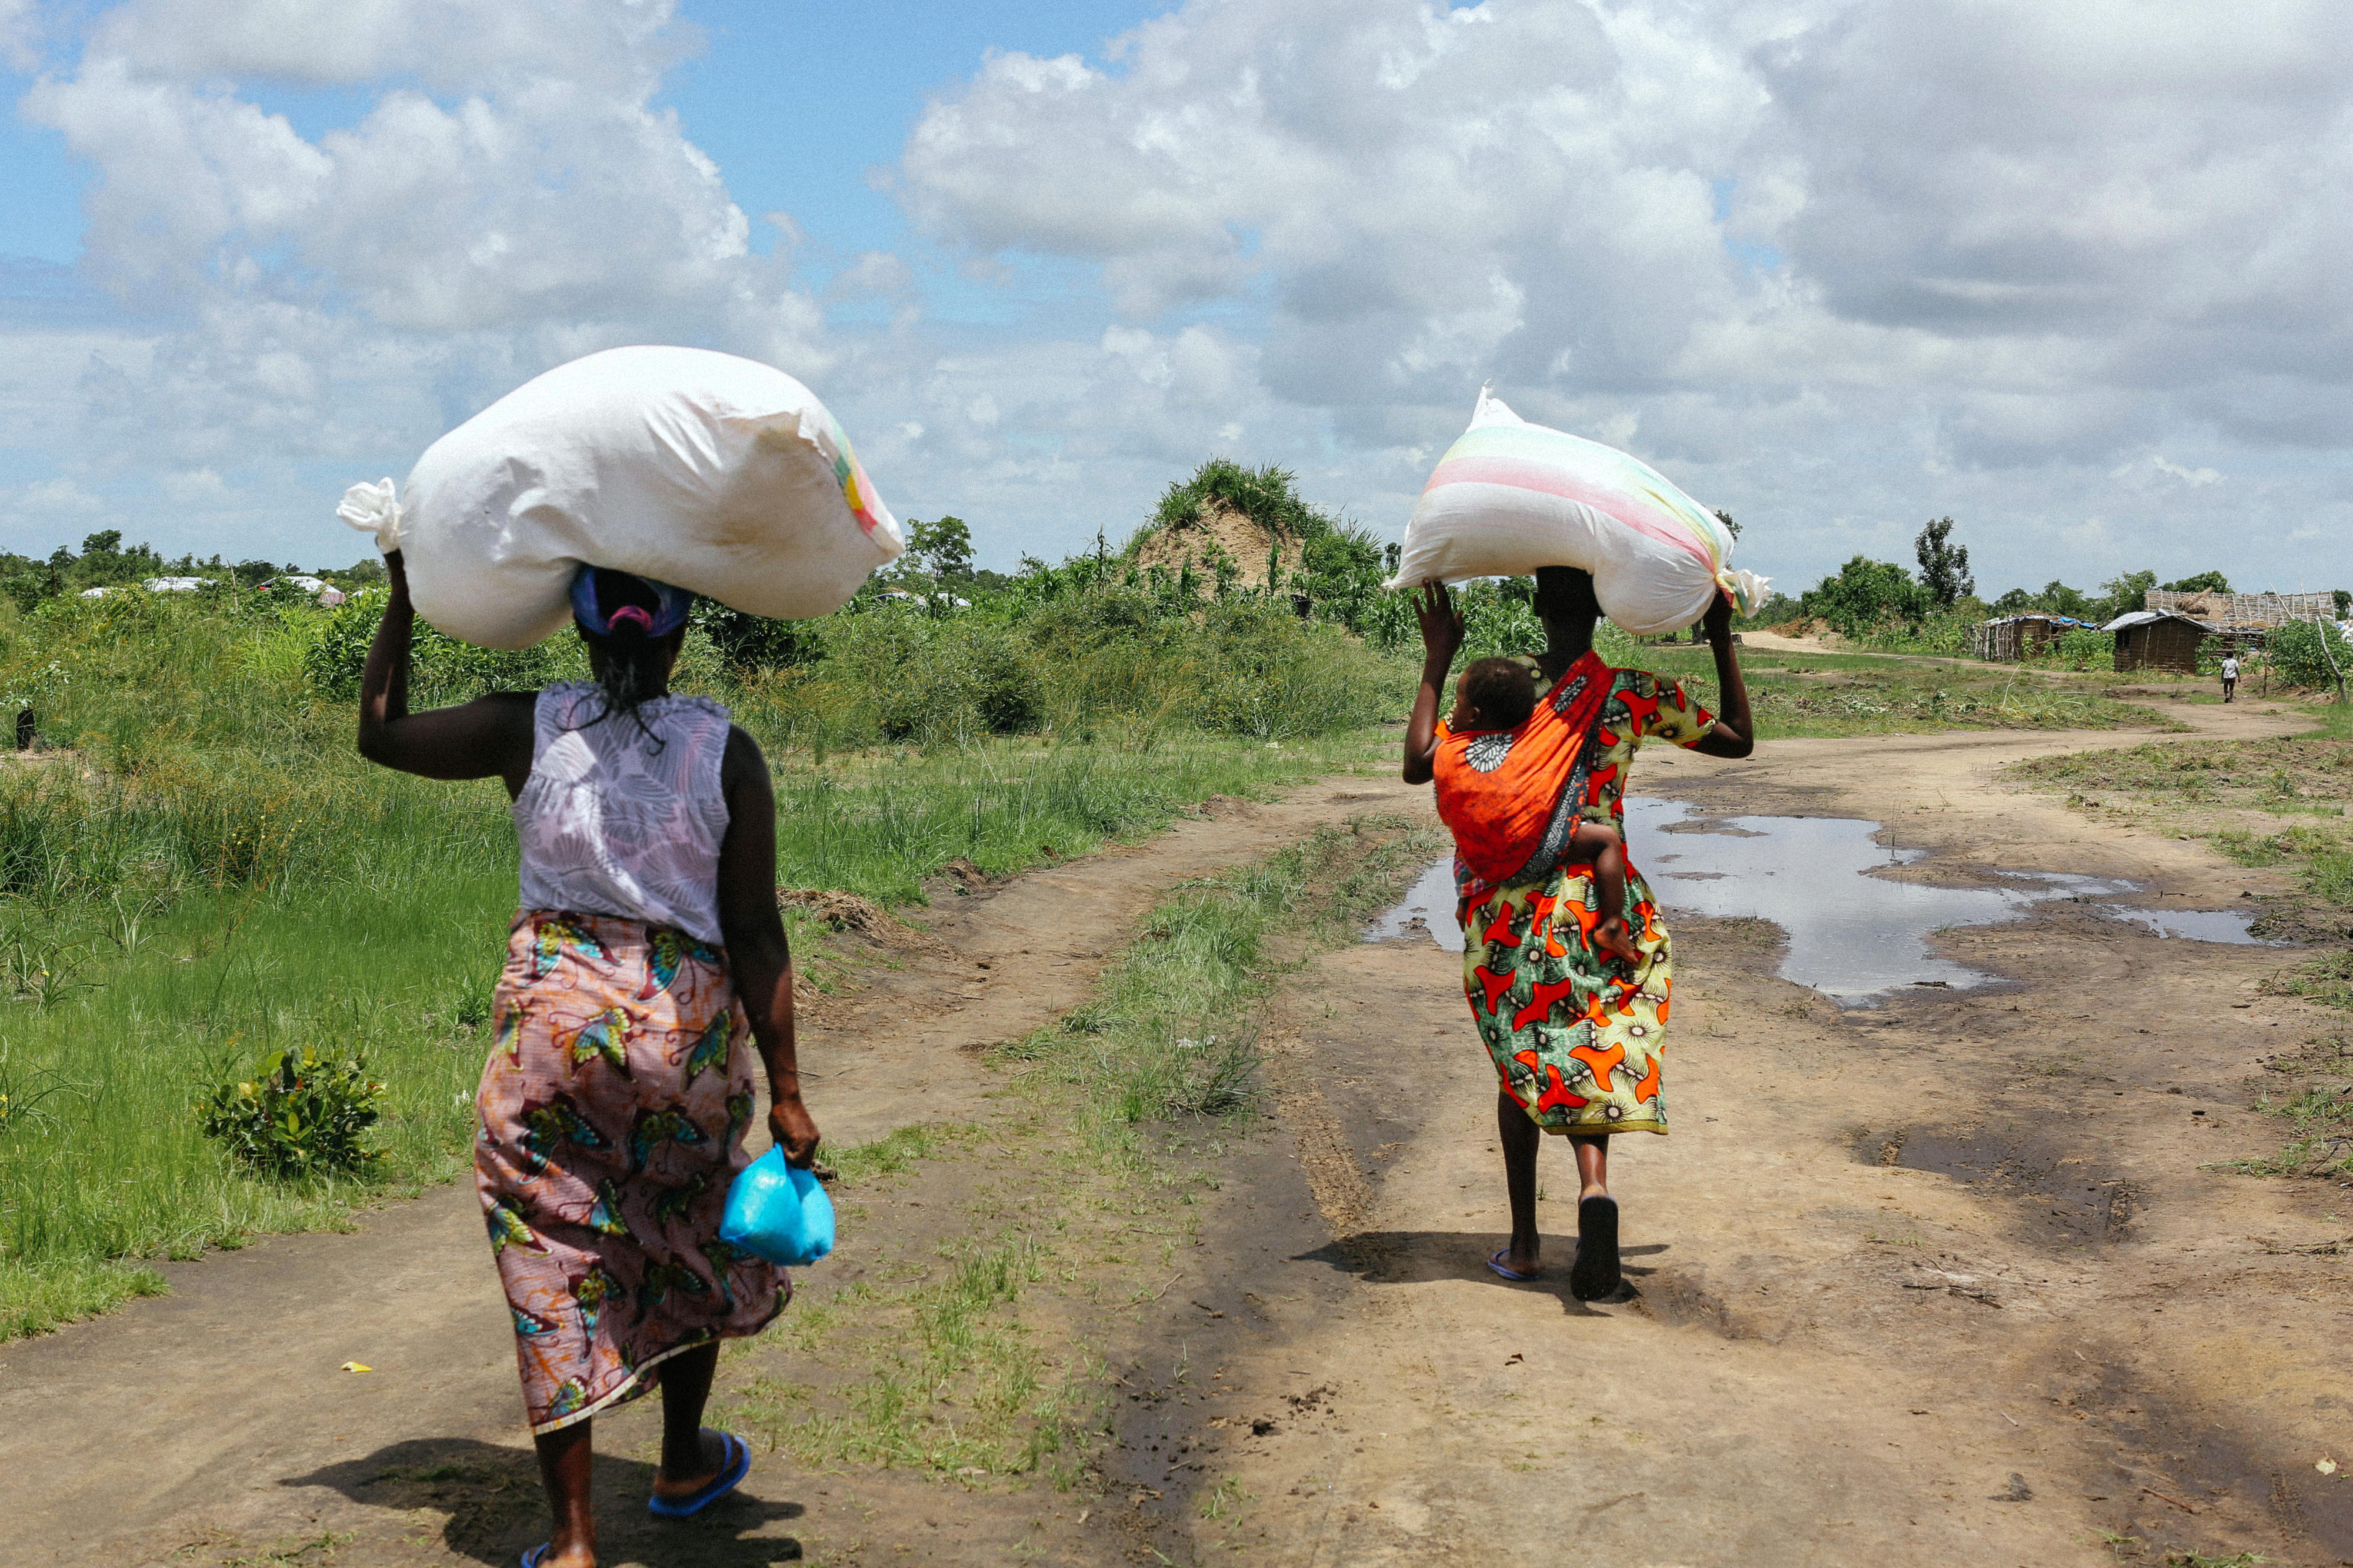 Women in Sofala Province, Mozambique, who are still being supported by the World Food Programme one year after the devastating cyclone Idai.